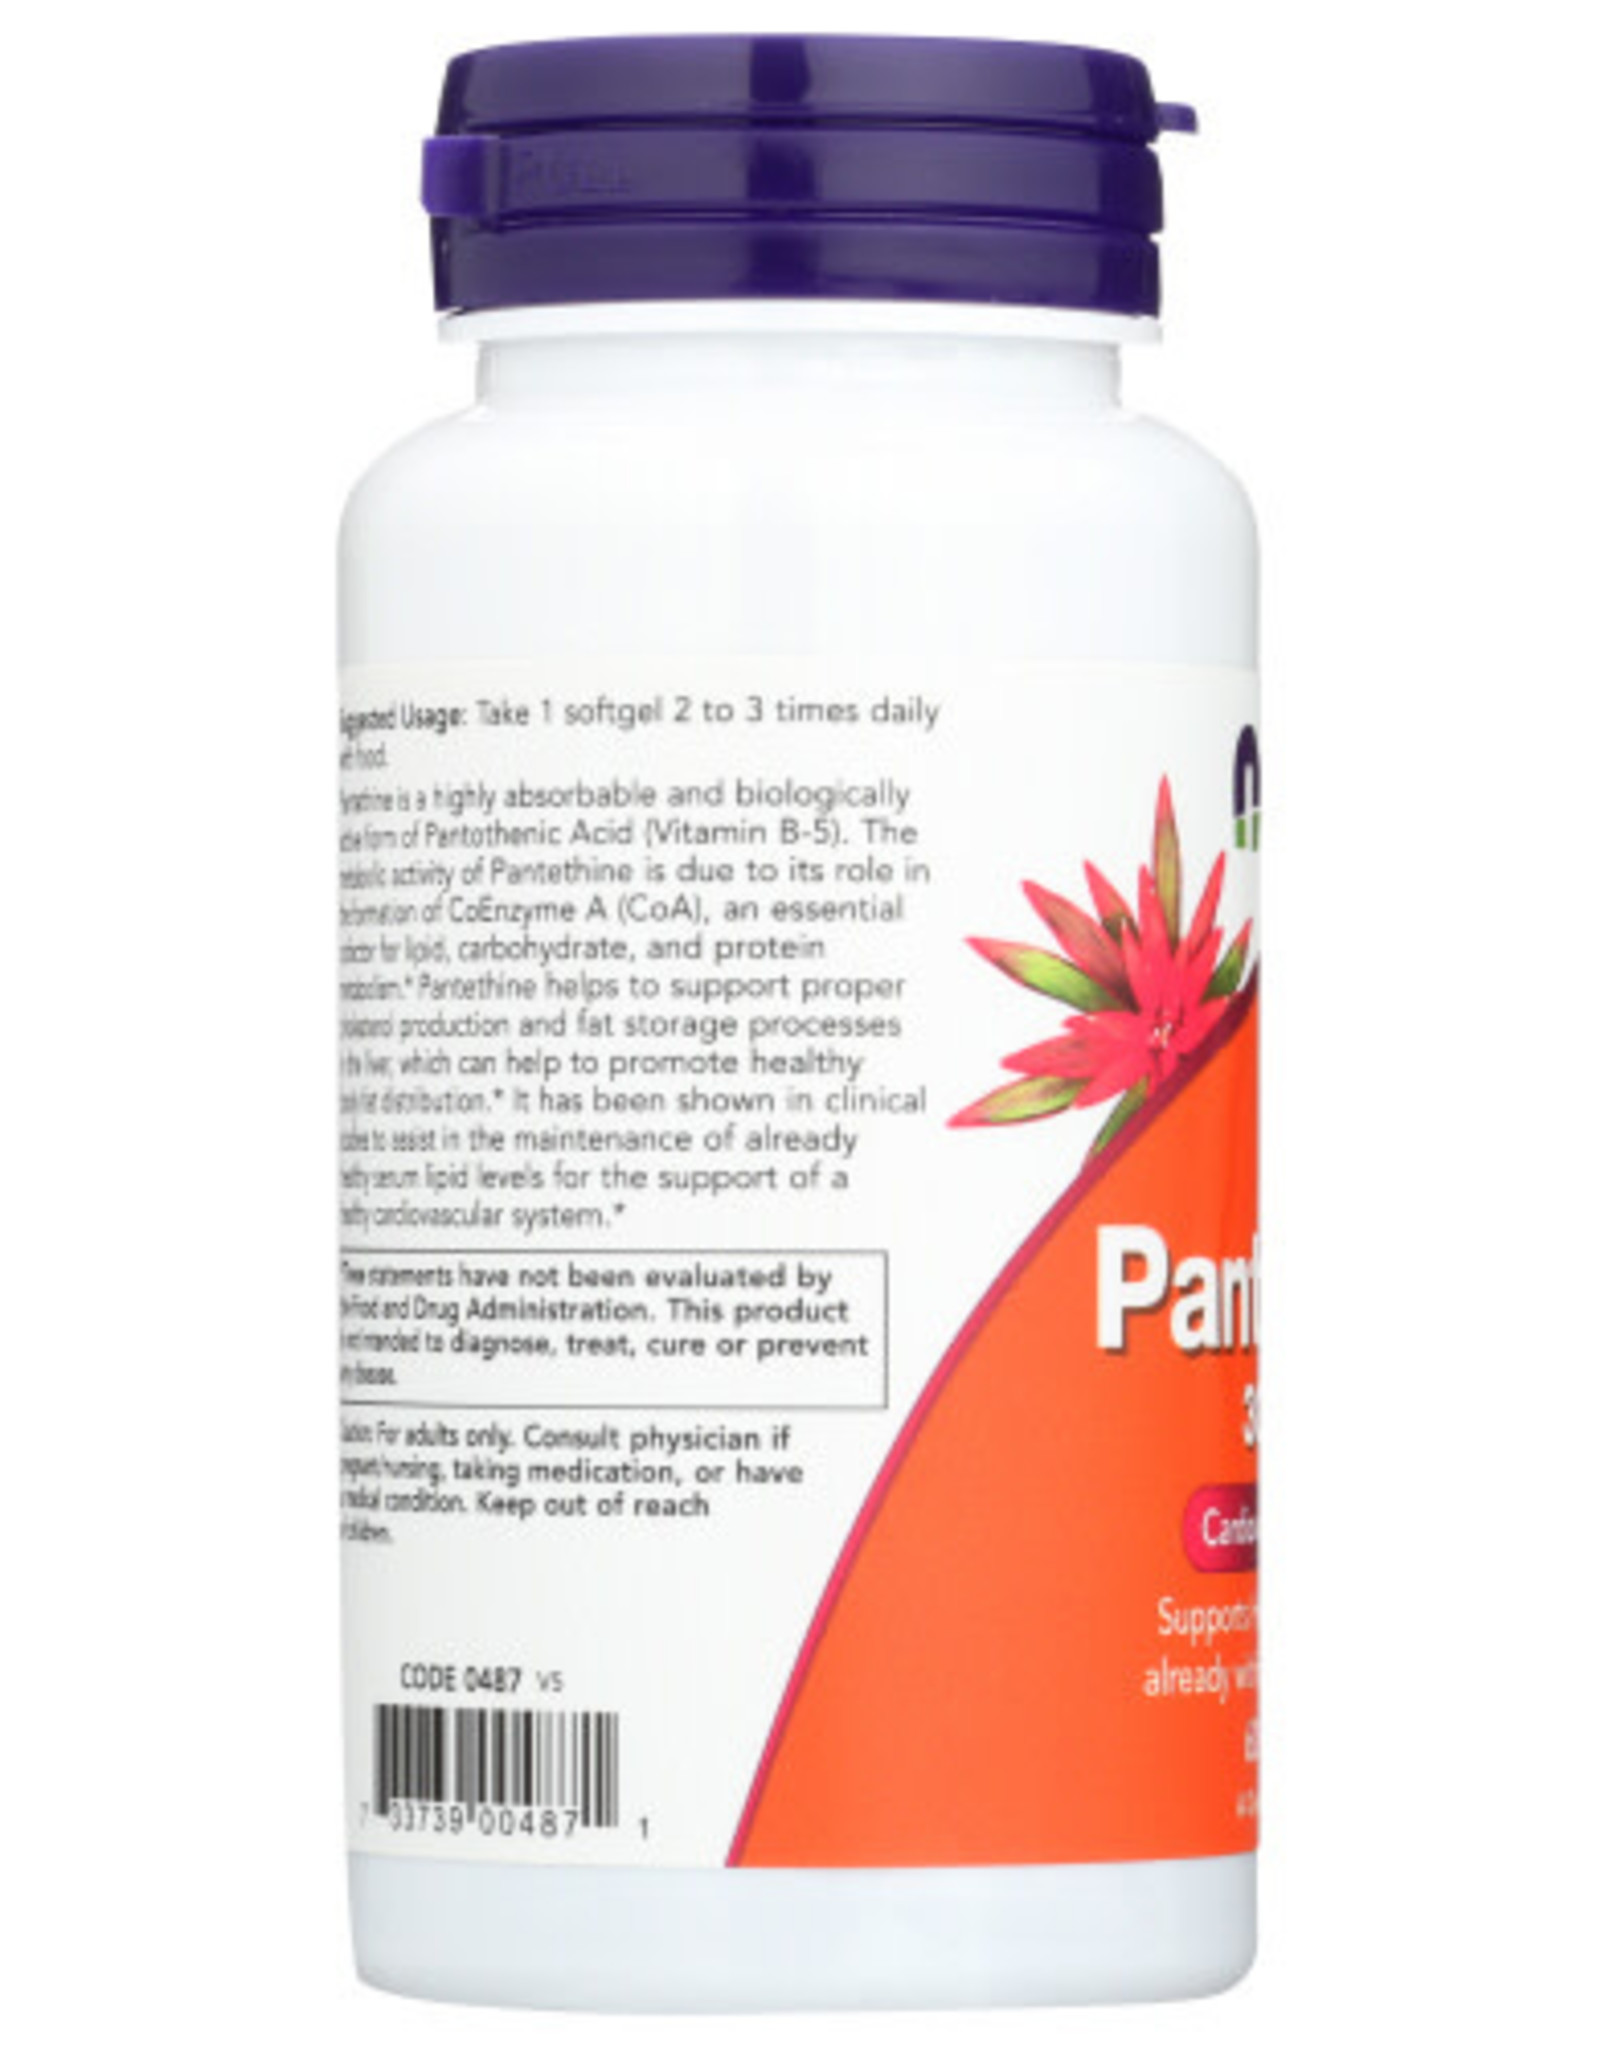 NOW FOODS X Now Pantethine 300mg Cardiovascular Health 60 Softgels